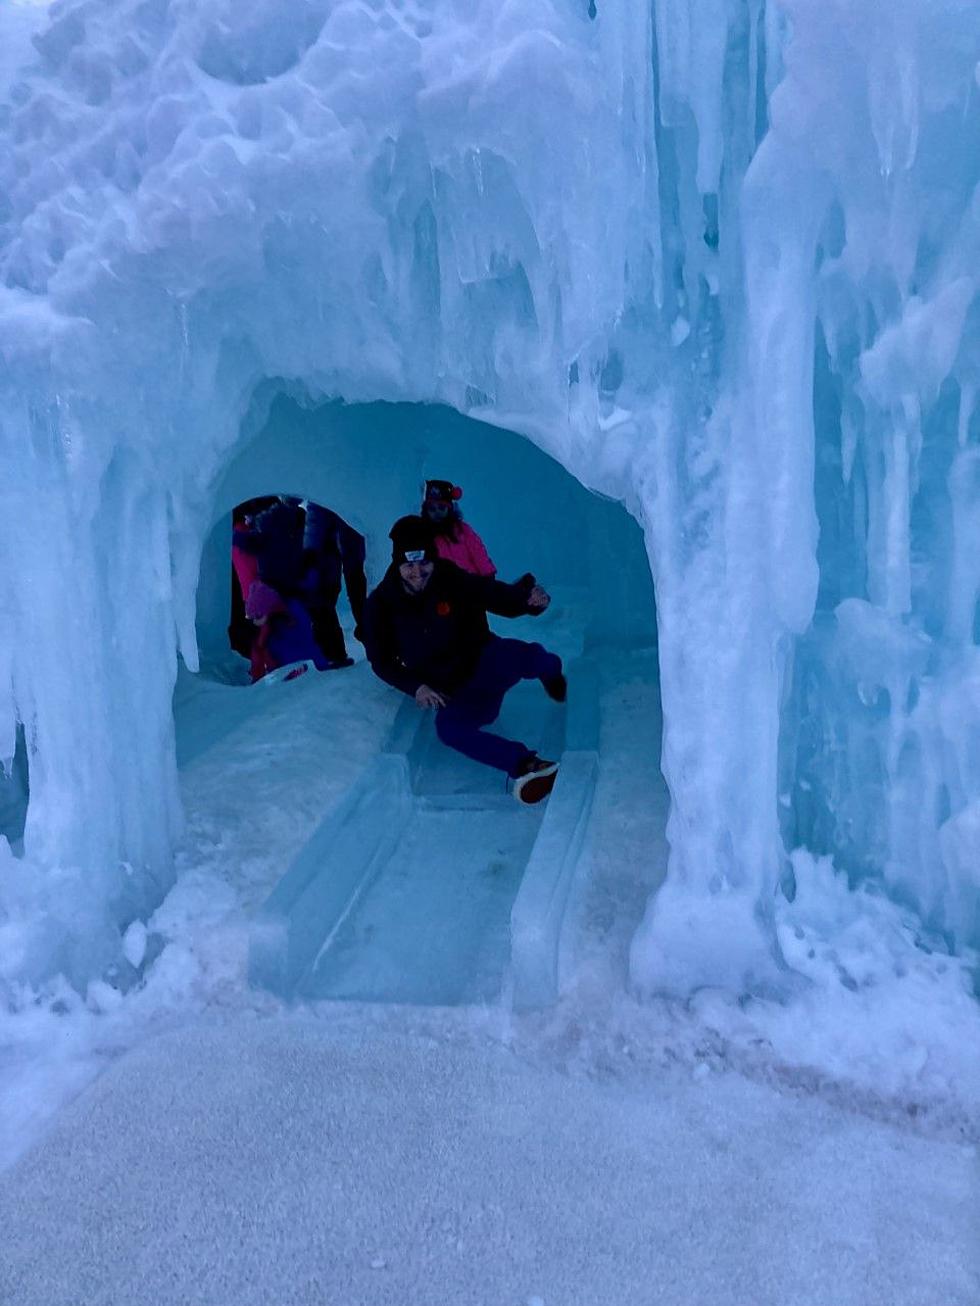 NY Ice Castles Event Sold Out! Or Is It? Here's How To Get In